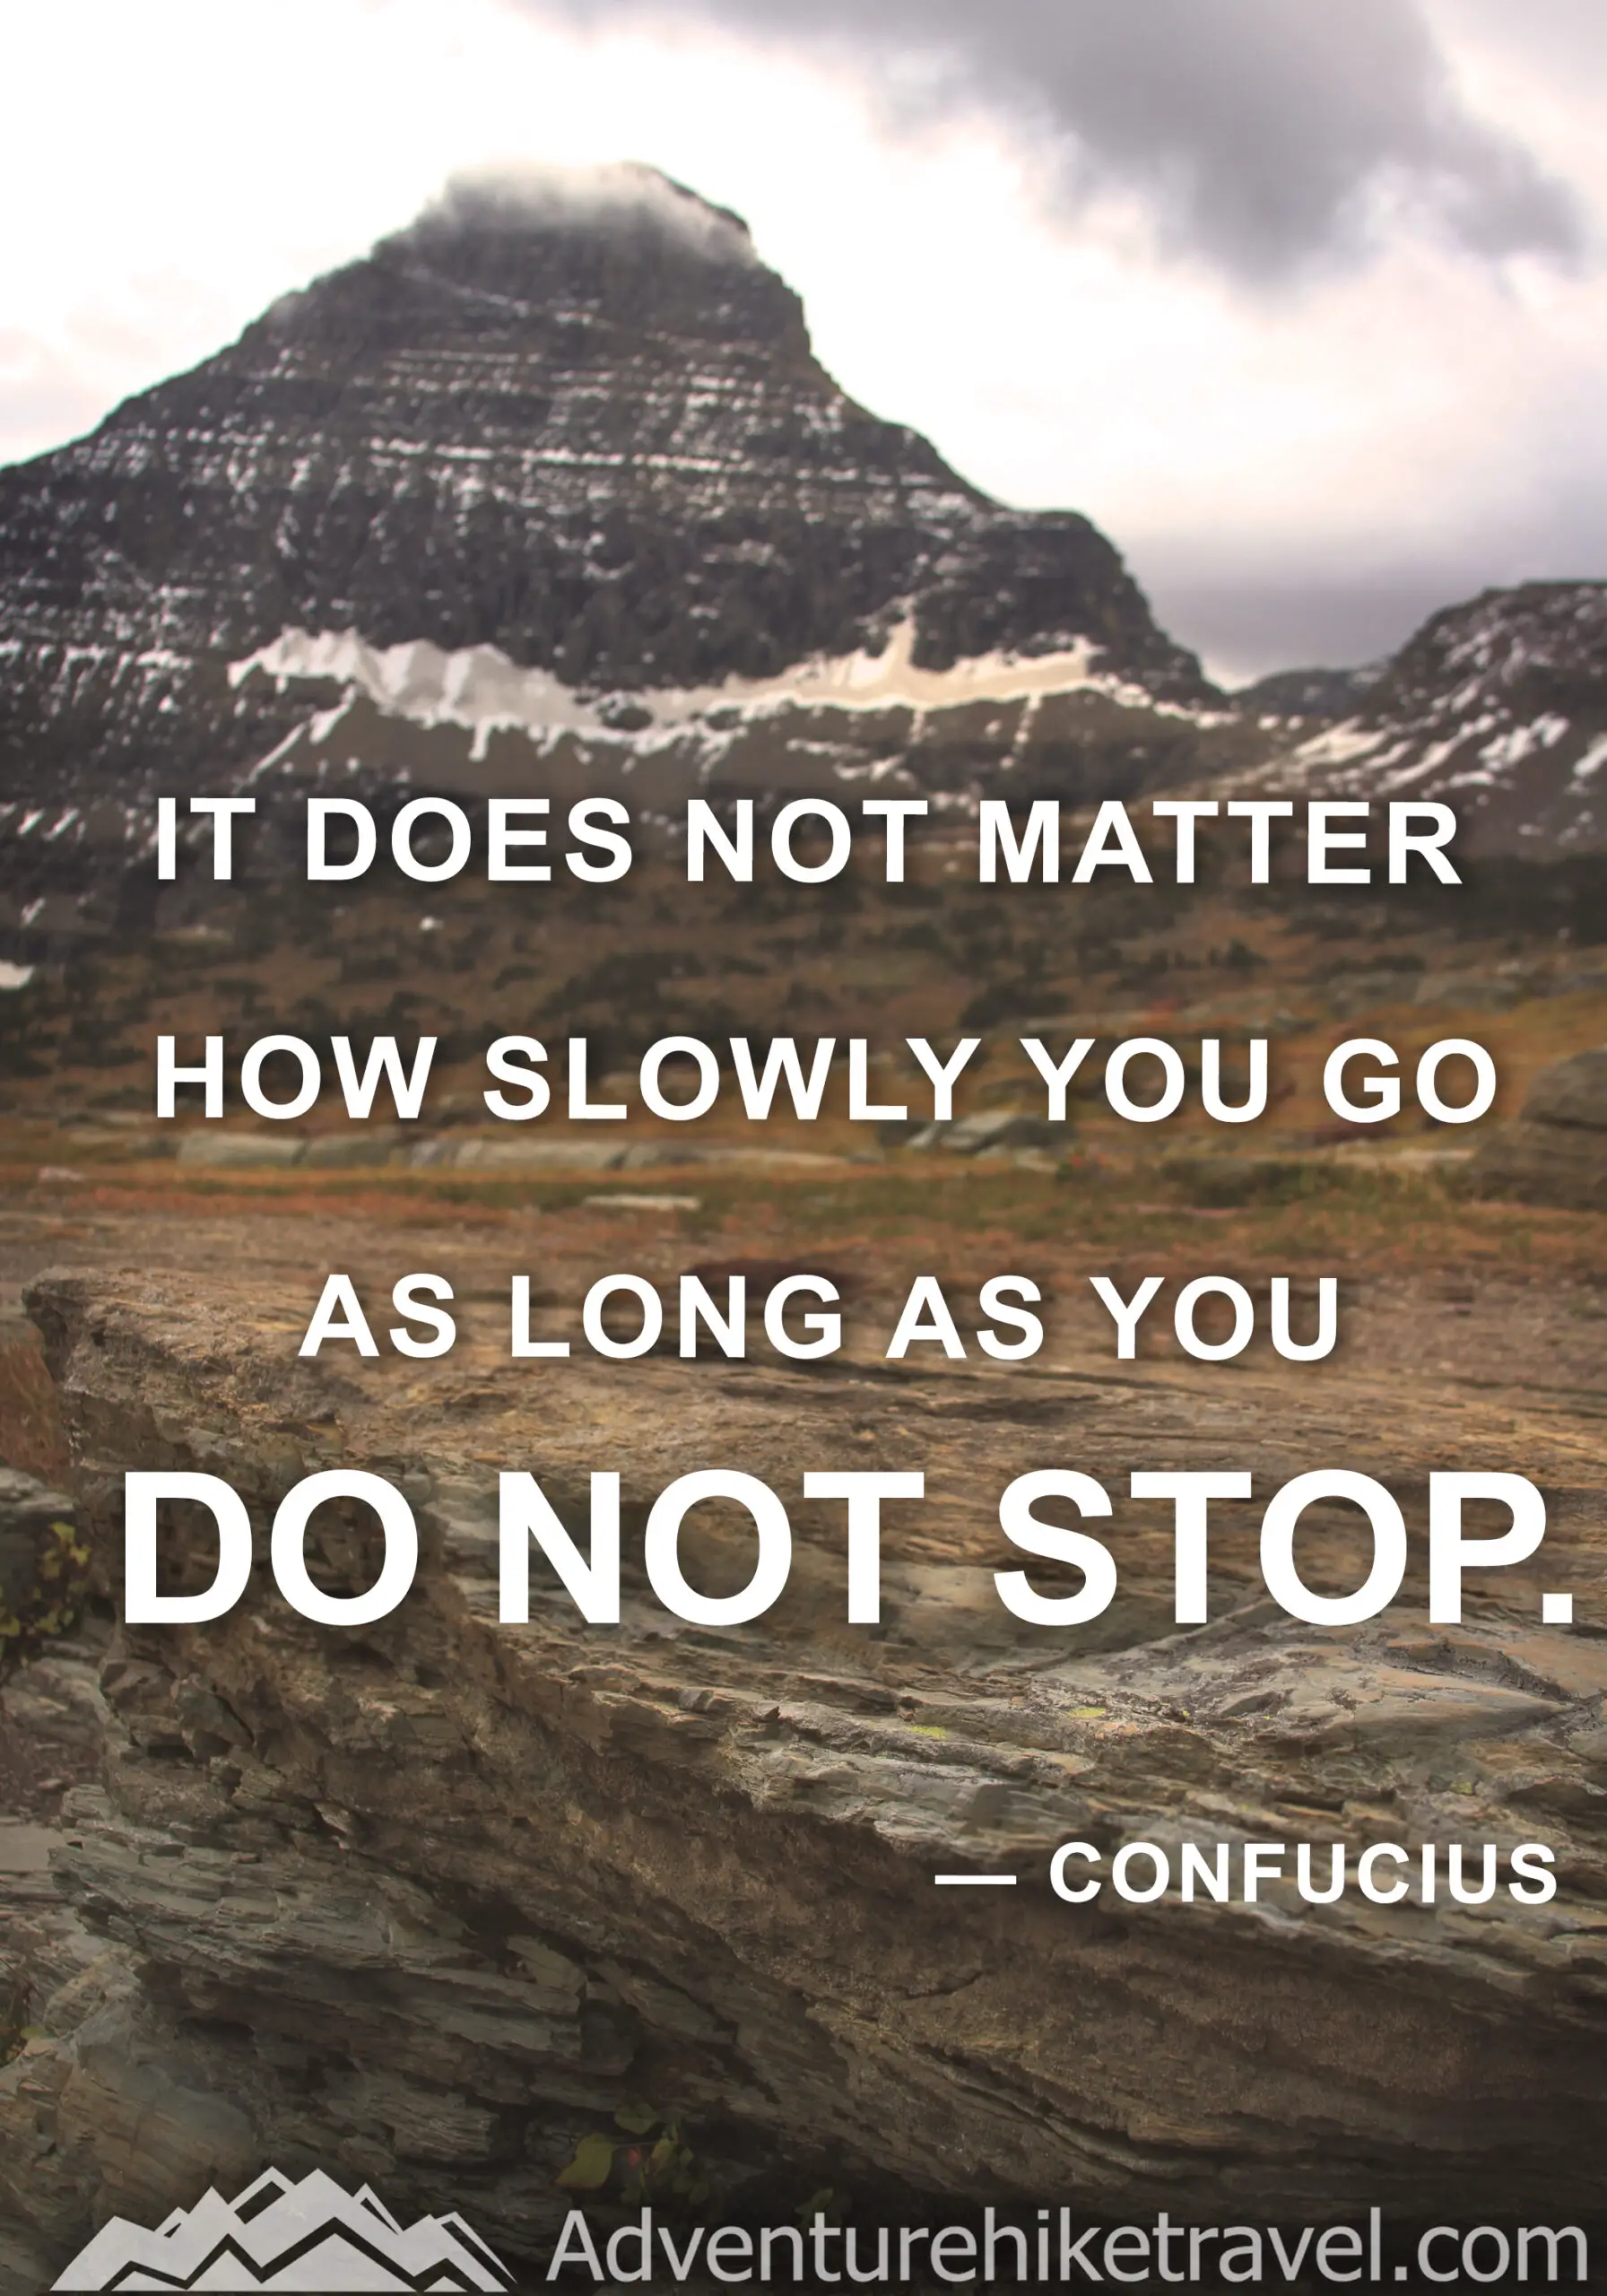 "It does not matter how slowly you go as long as you do not stop." - Confucius #hiking #quotes #inspirationalquotes #hikingquotes #adventurequotes #outdoors #trekking